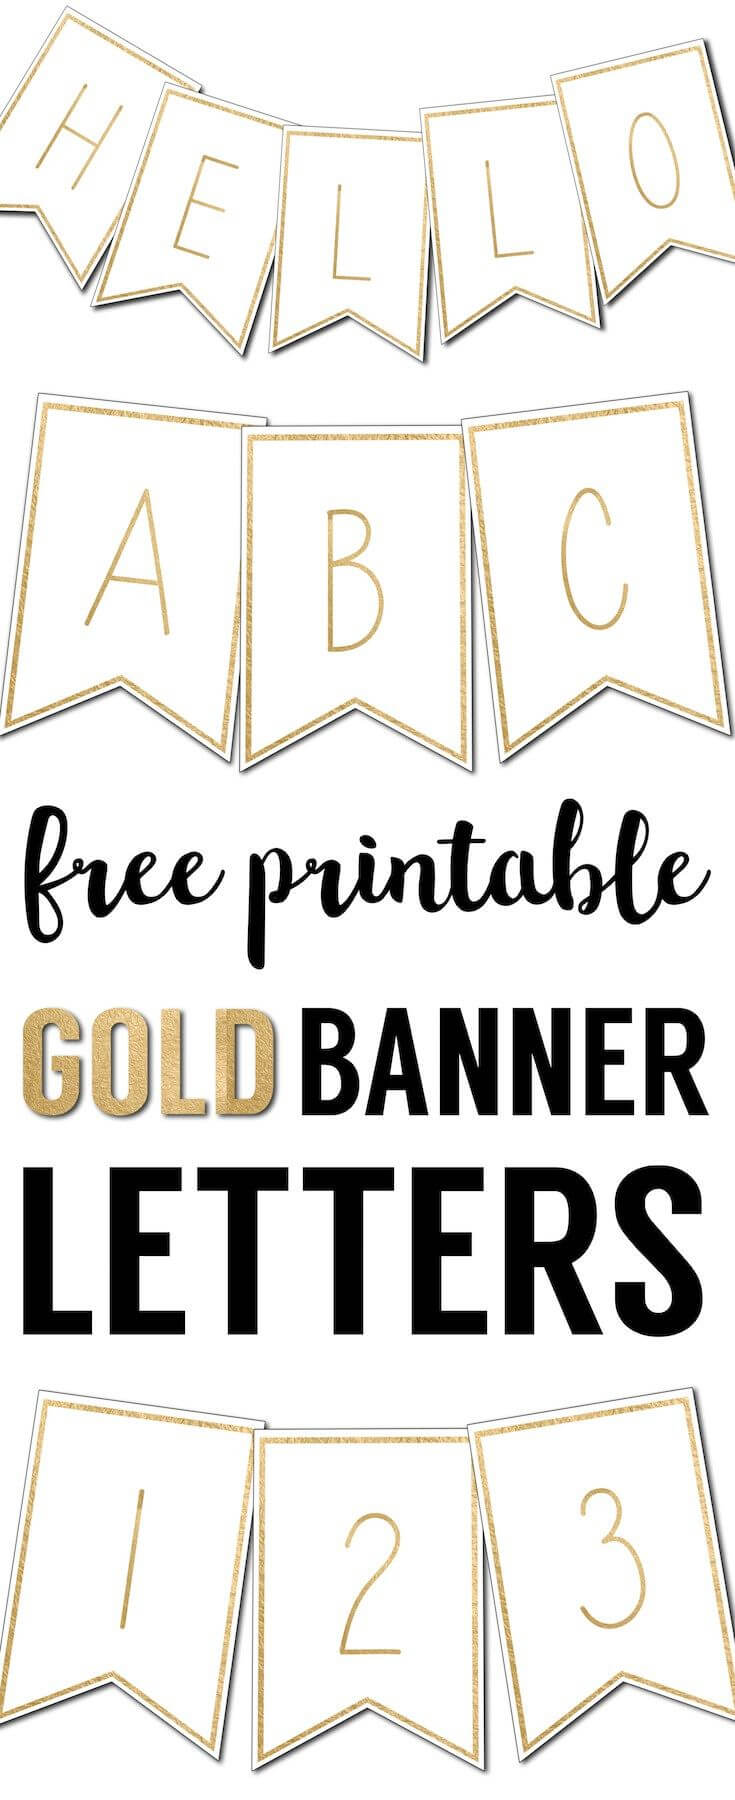 Free Printable Banner Letters Templates | Printable Banner Throughout Letter Templates For Banners